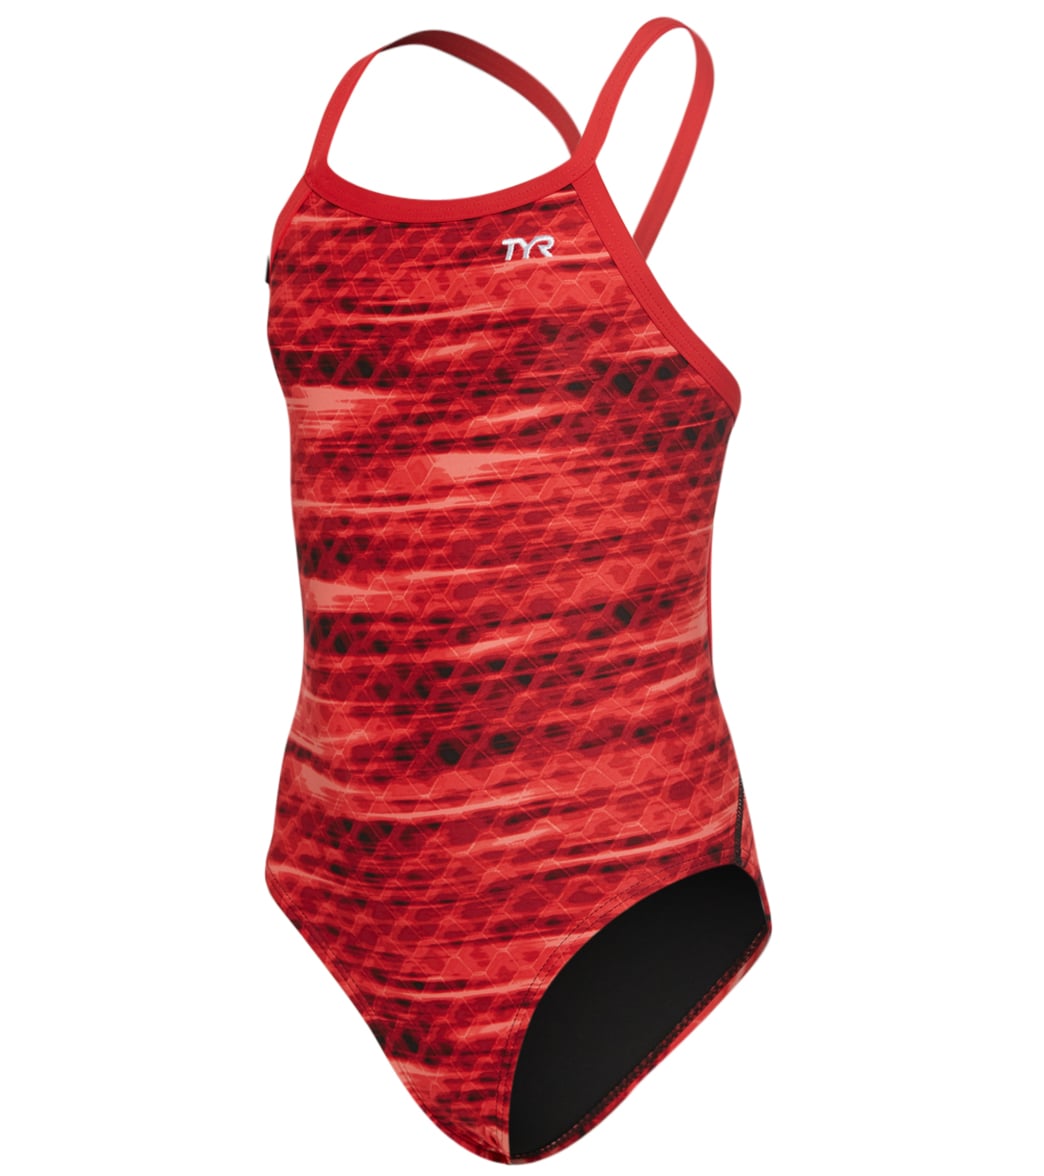 TYR Girls' Castaway Diamondfit One Piece Swimsuit - Red 24 - Swimoutlet.com